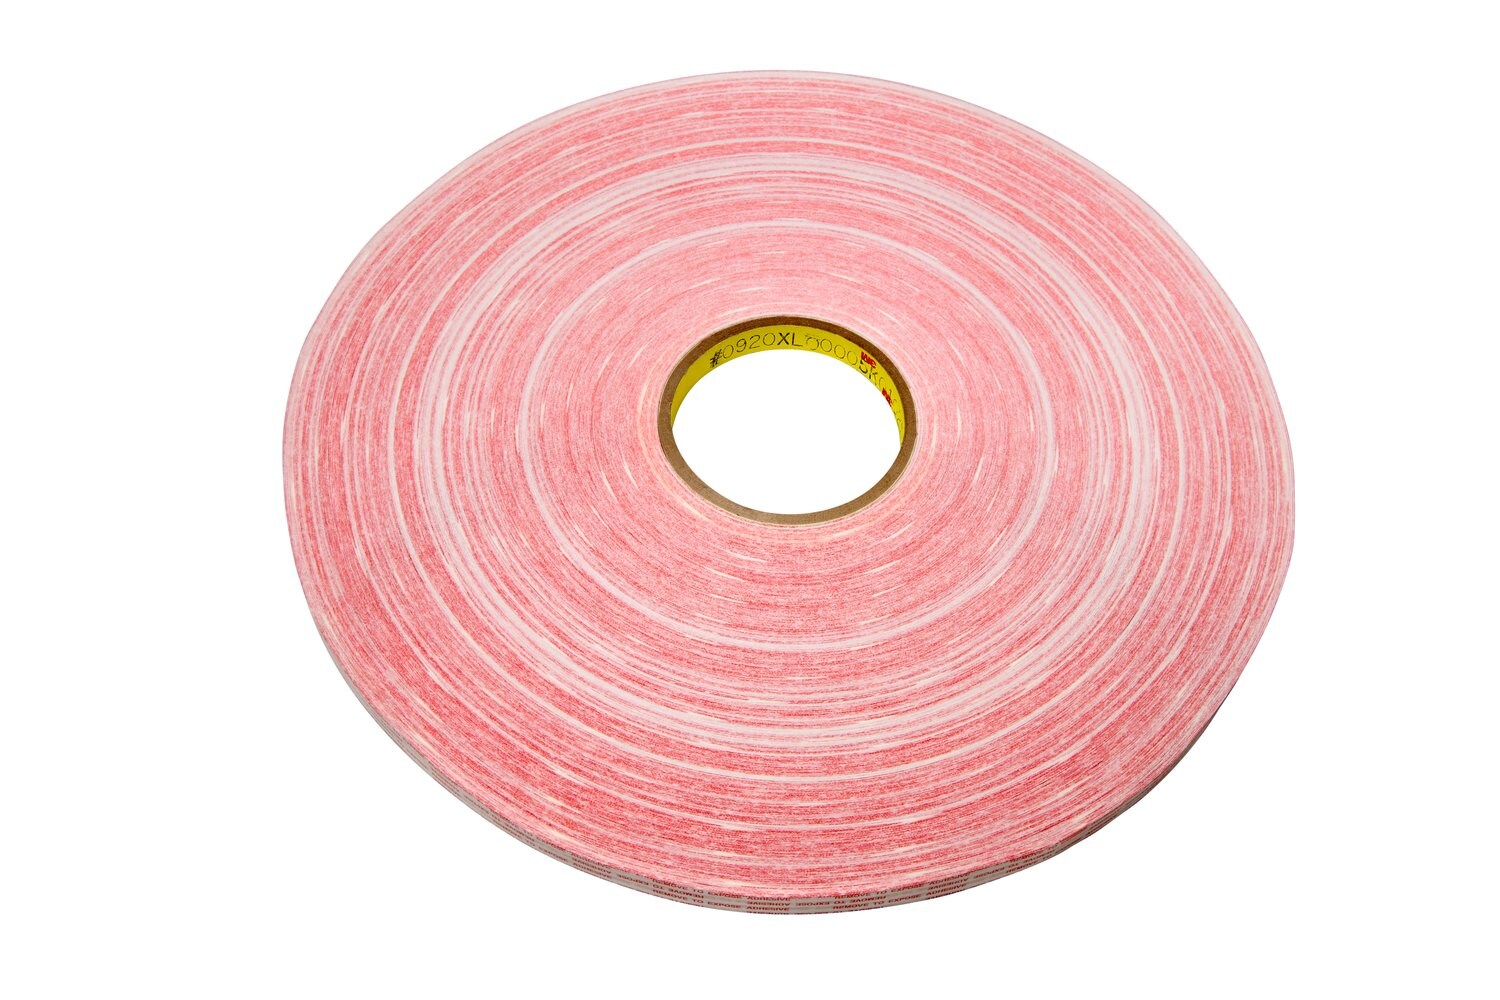 7000048424 - 3M Adhesive Transfer Tape Extended Liner 920XL, Translucent, 1/2 in x 1000 yd, 1 mil, 12 Roll/Case